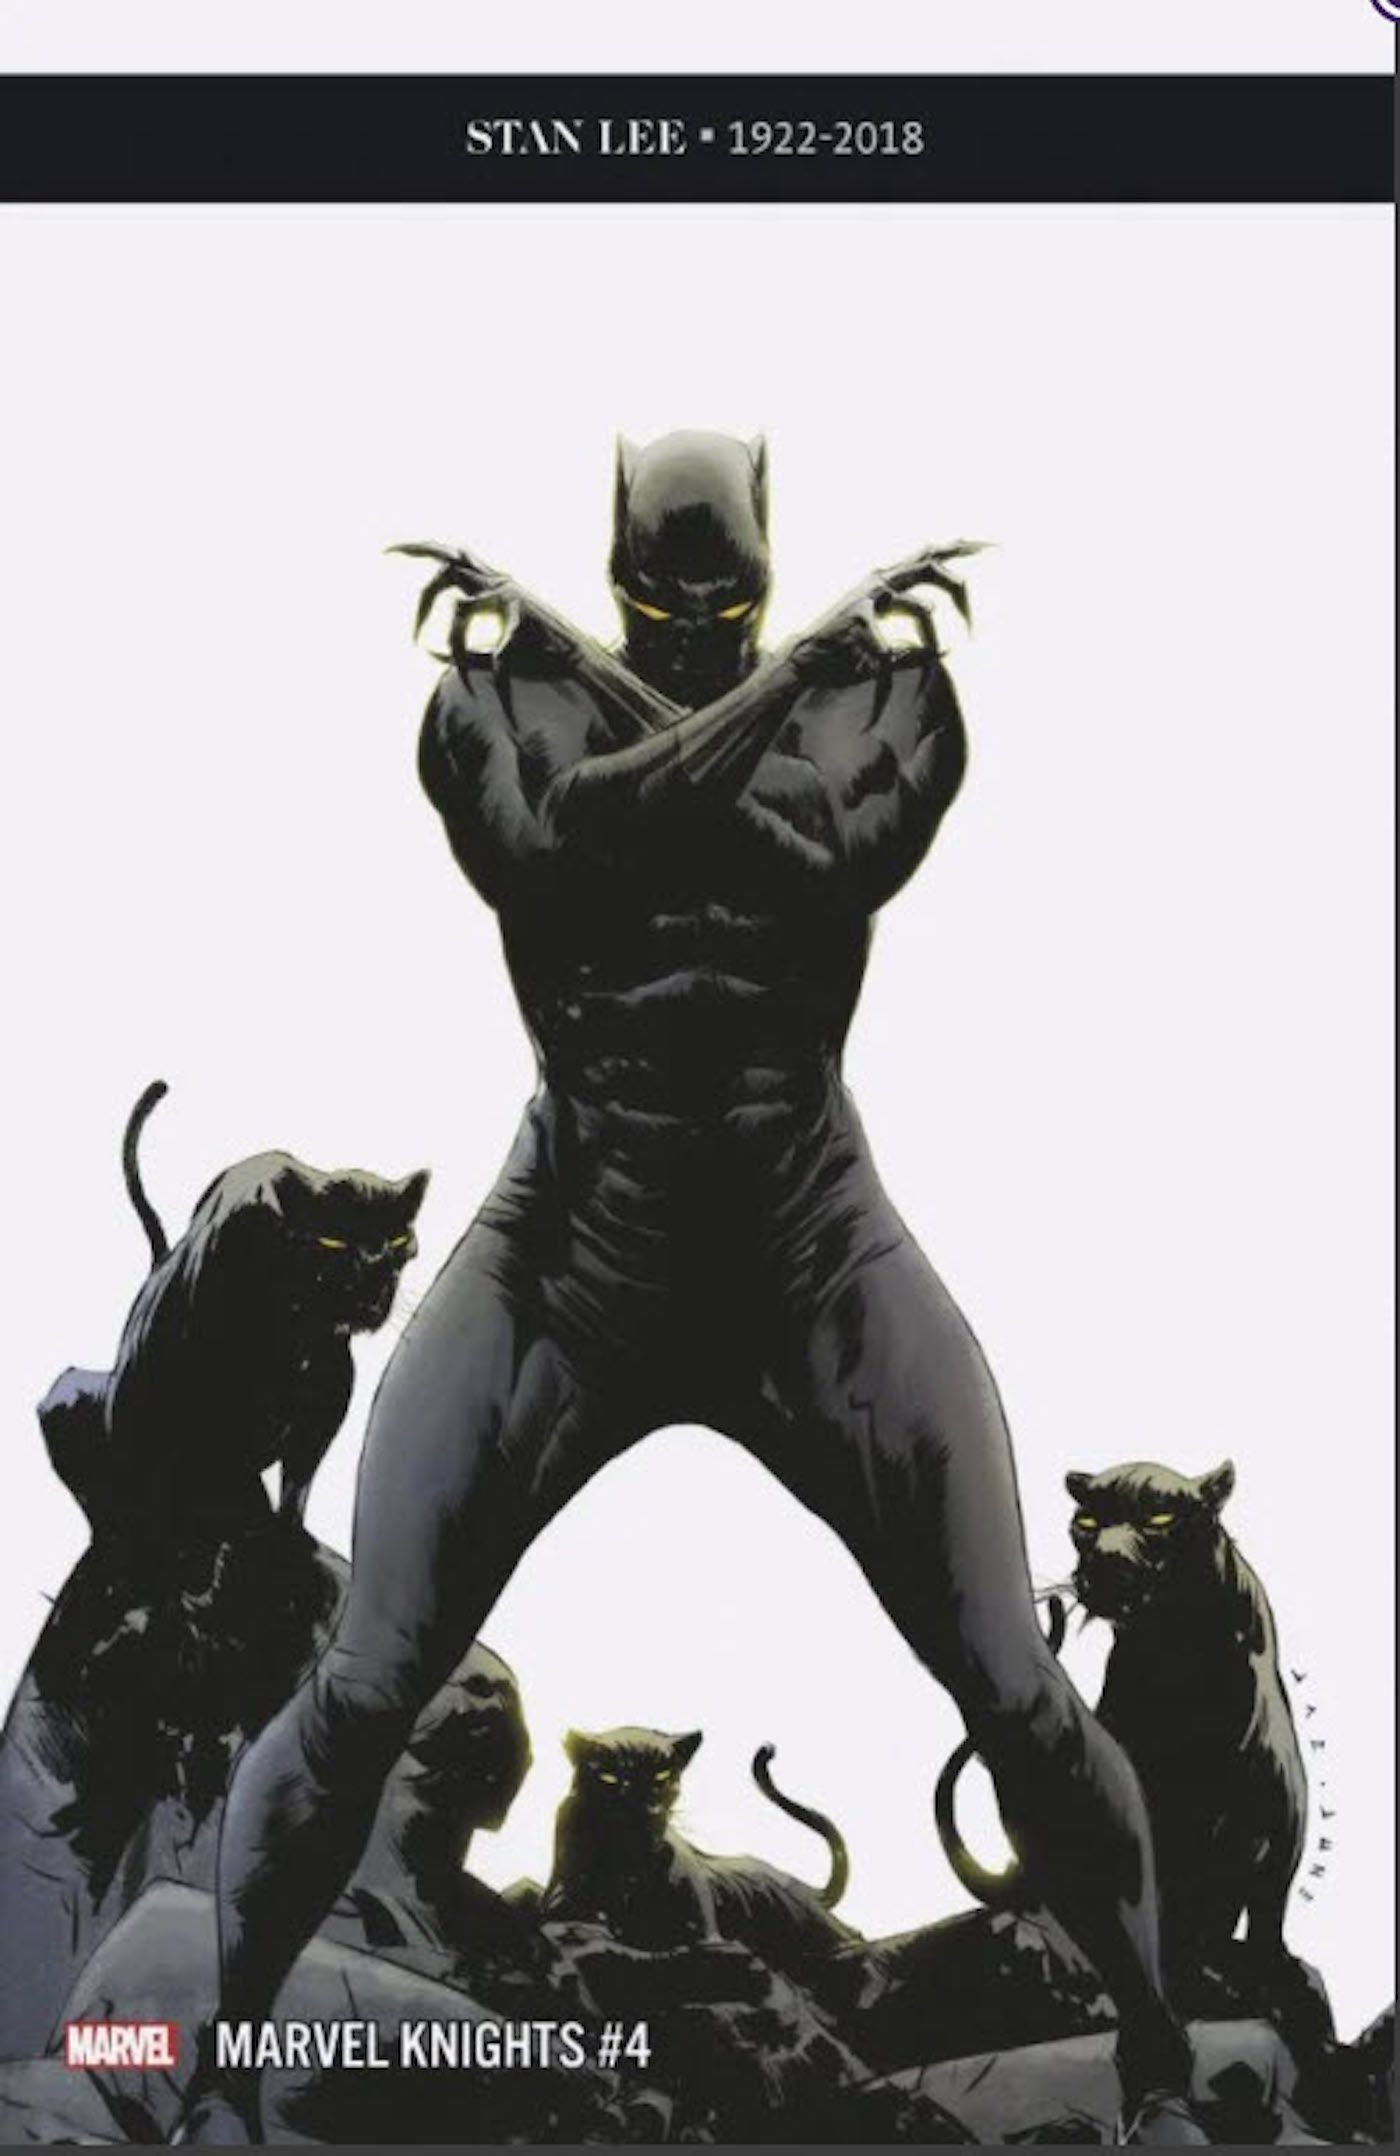 1. Black Panther Marvel Knights 20th 4 variant